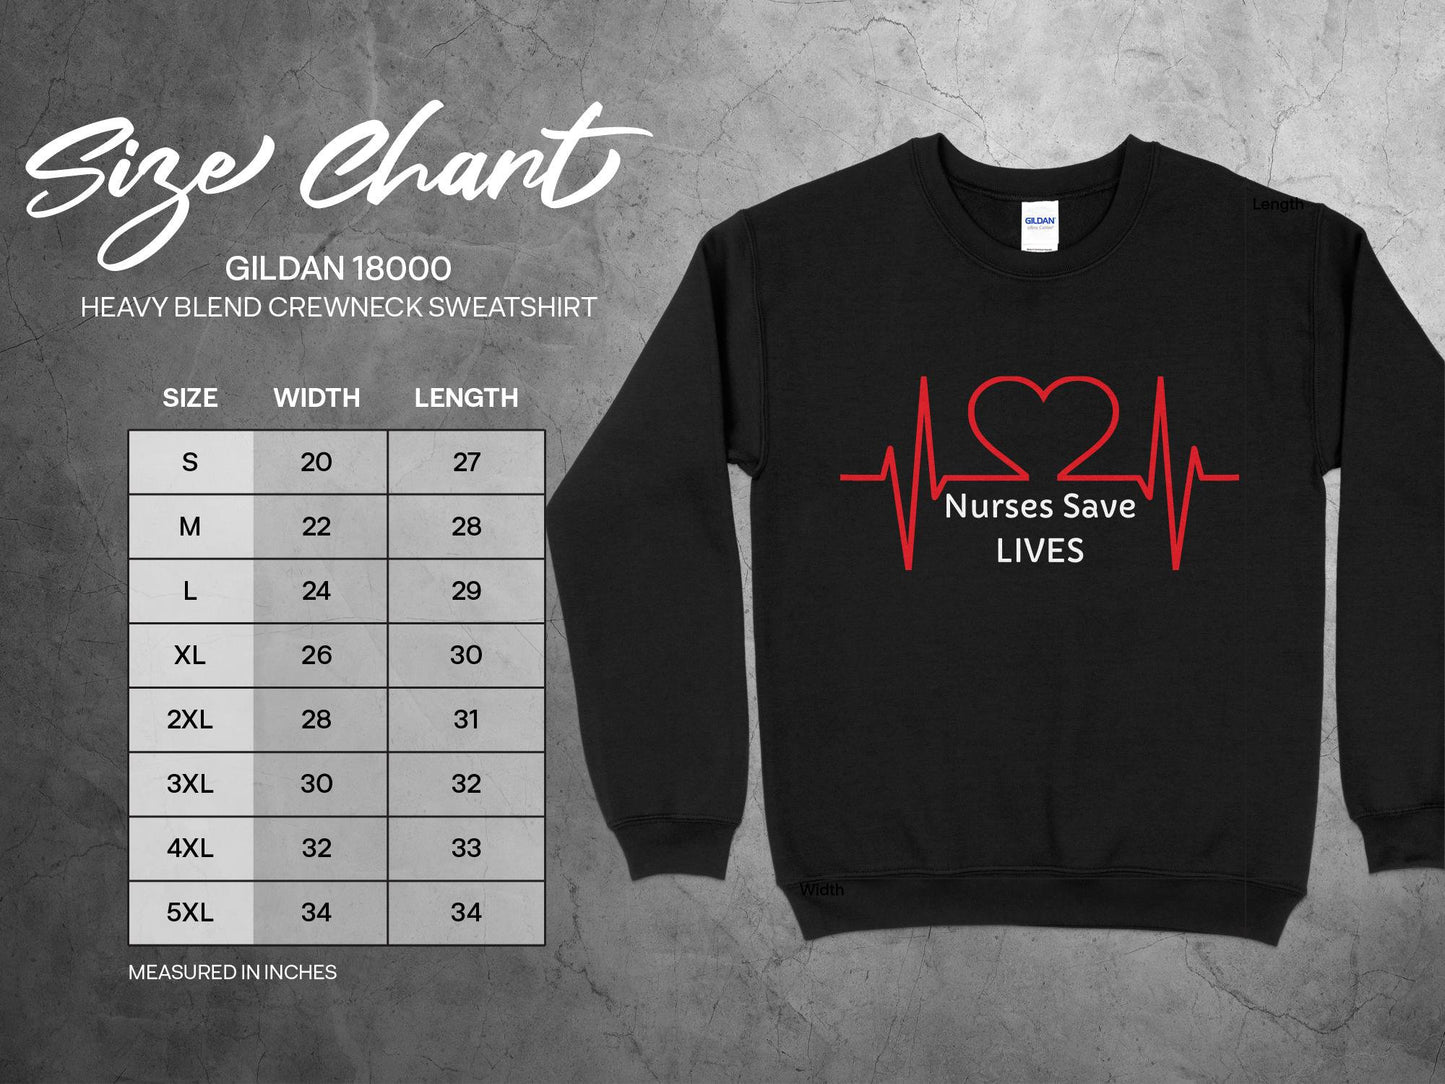 Nurses Save Lives T-Shirt - A Tribute to Healthcare Heroes with New Nurse Gift, Registered Nurse RN Icu Shirt